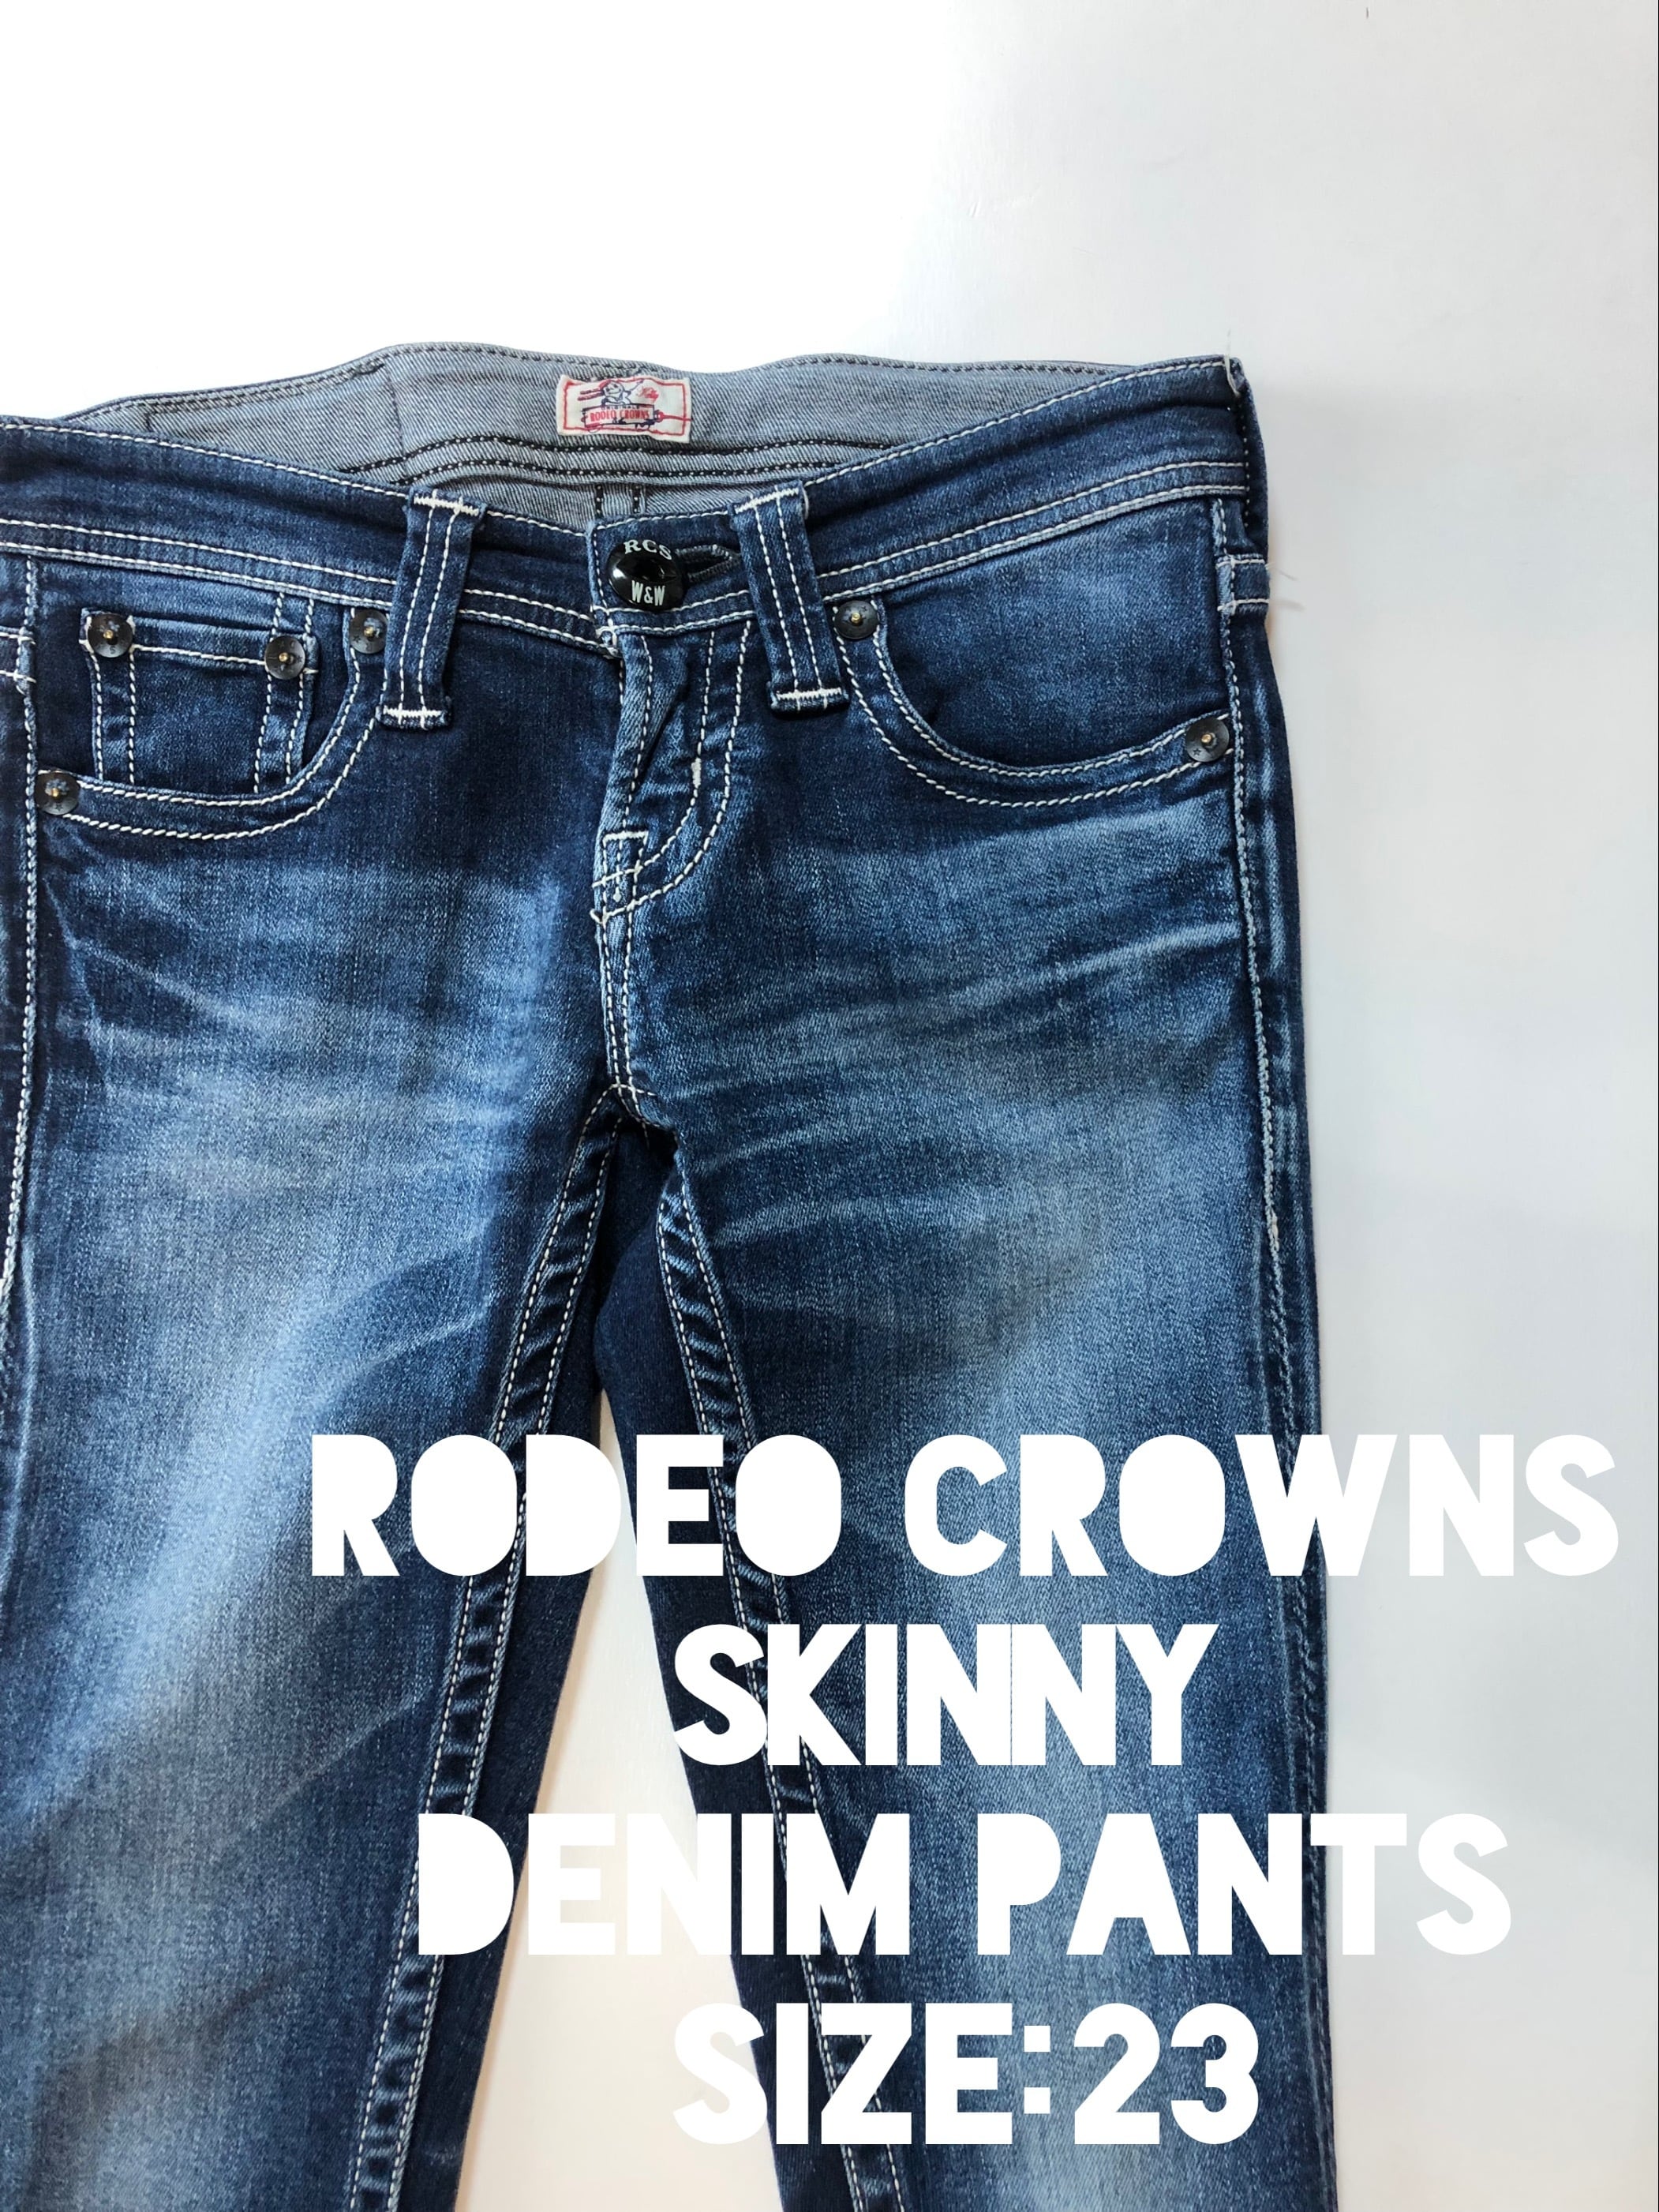 23 Rodeo Crowns スキニーデニム 433 | ＳＥＣＯＮＤ HAND RED